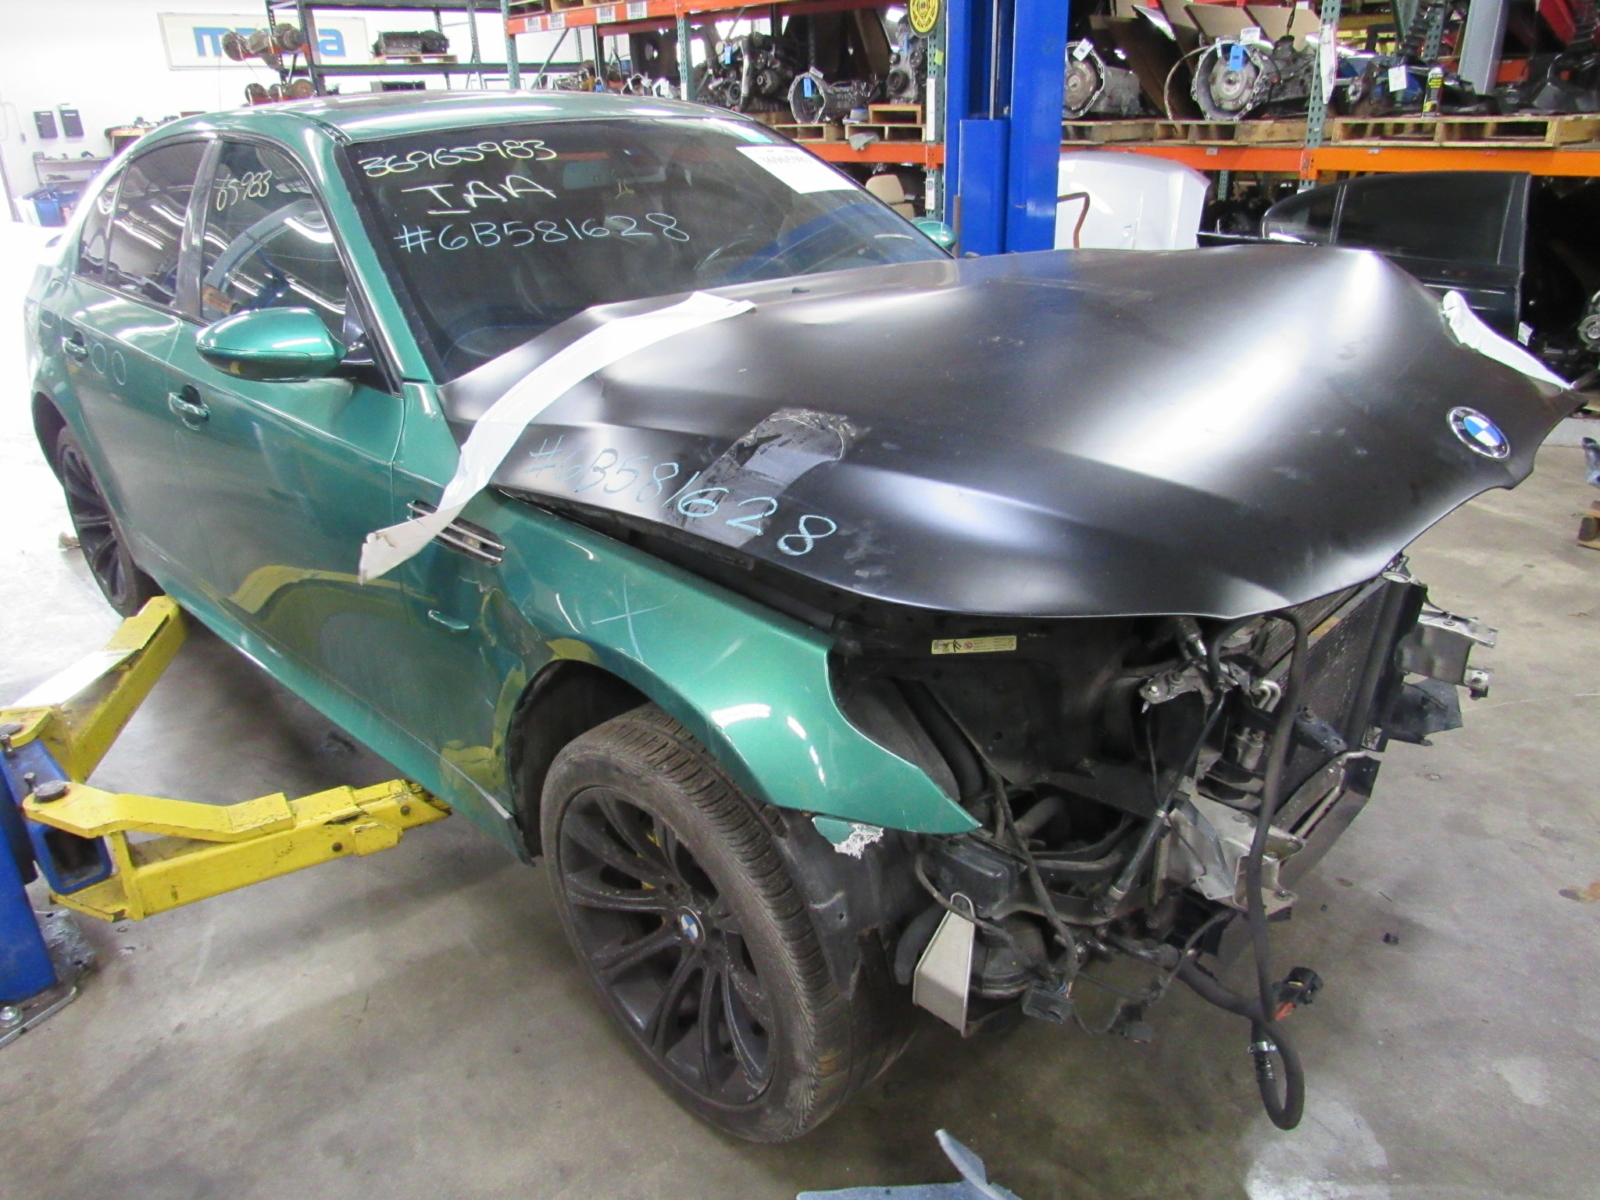 2006 BMW E60 M5 S85 V10 SMG Parting Out 8-21-23